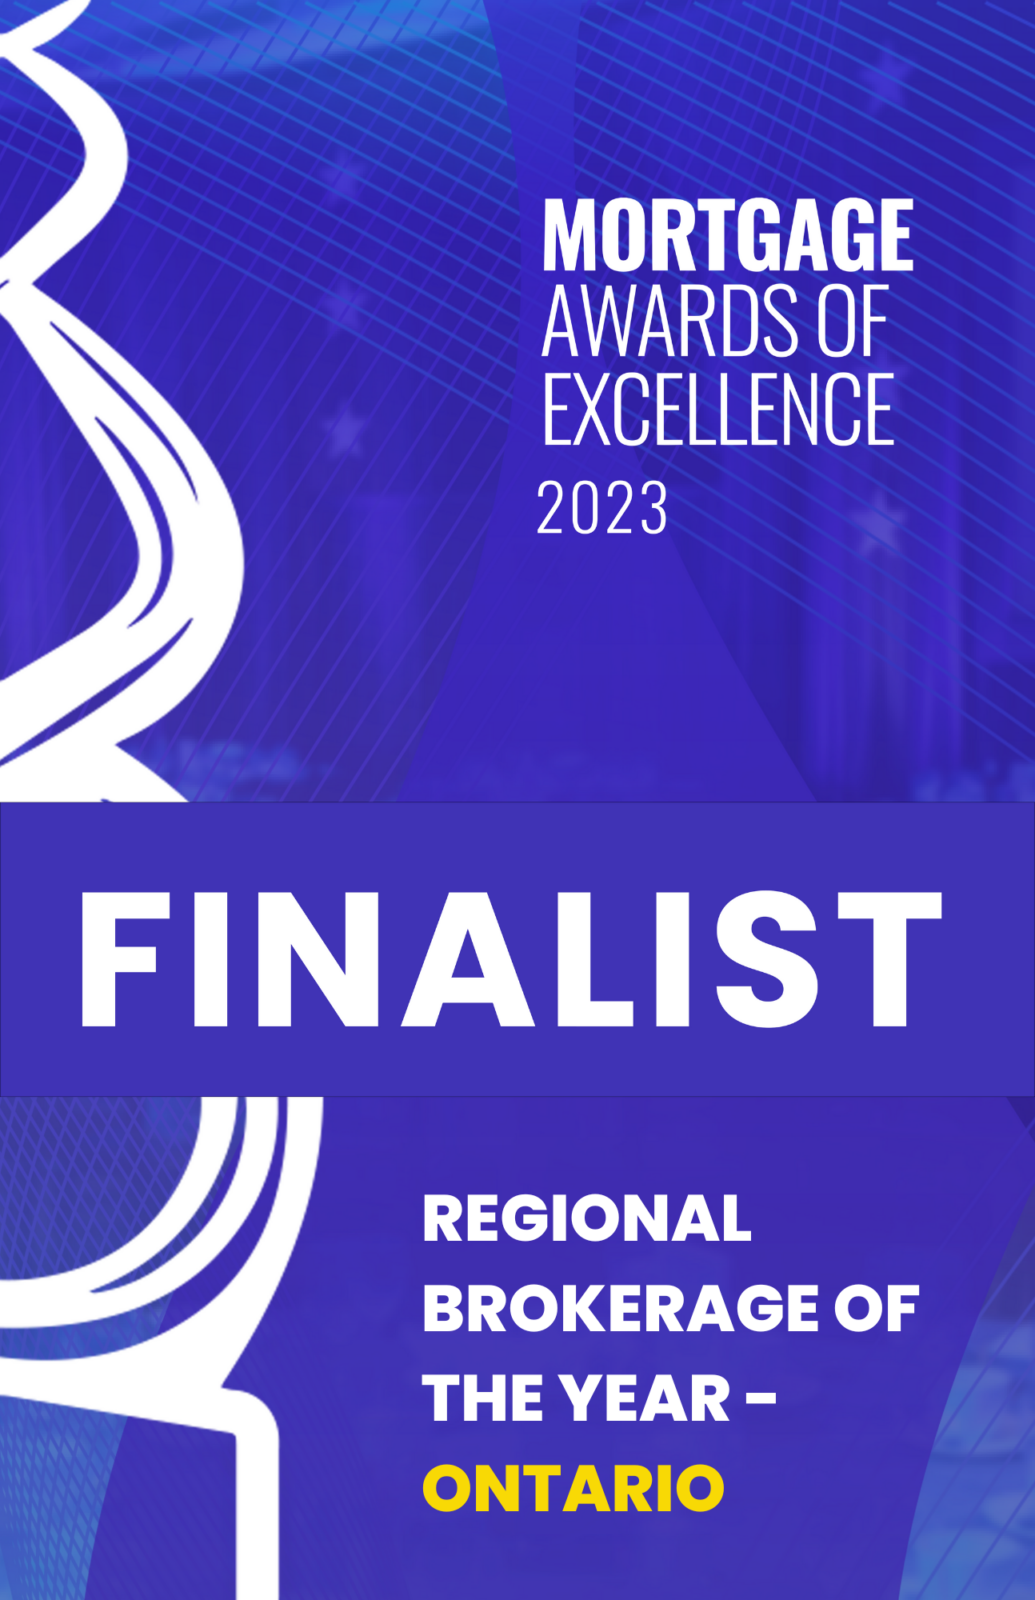 Mortgage Awards of Excellence 2023: Finalist Regional Brokerage of the Year- Ontario Mortgage Scout